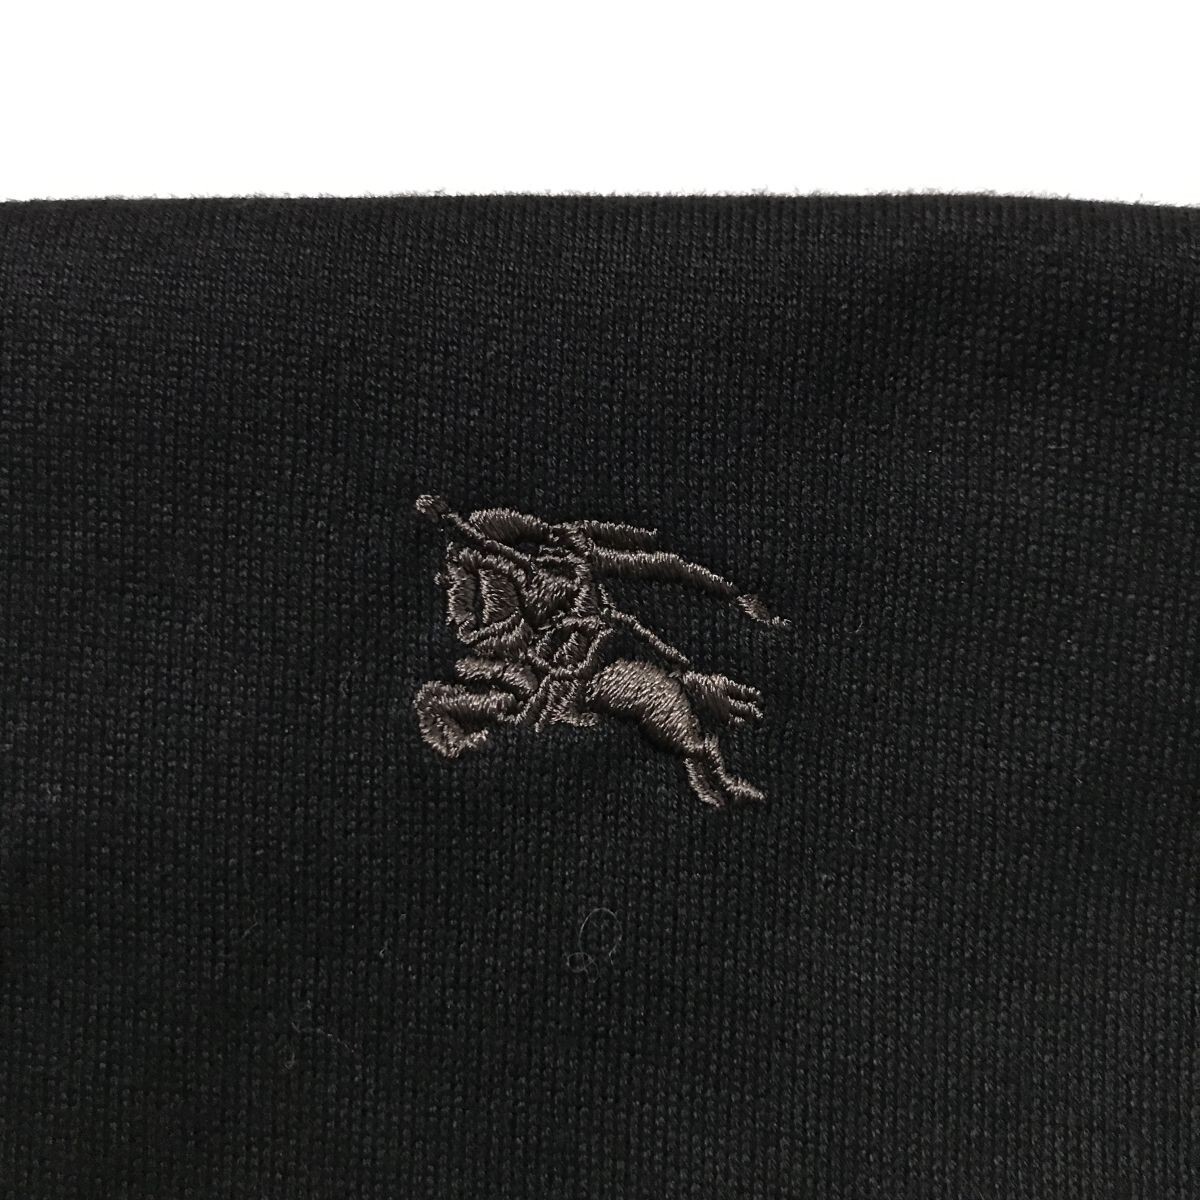  tag attaching unused goods Burberry BURBERRY LONDON short sleeves shoulder line hose Logo embroidery one Point T-shirt L black men's cut and sewn 